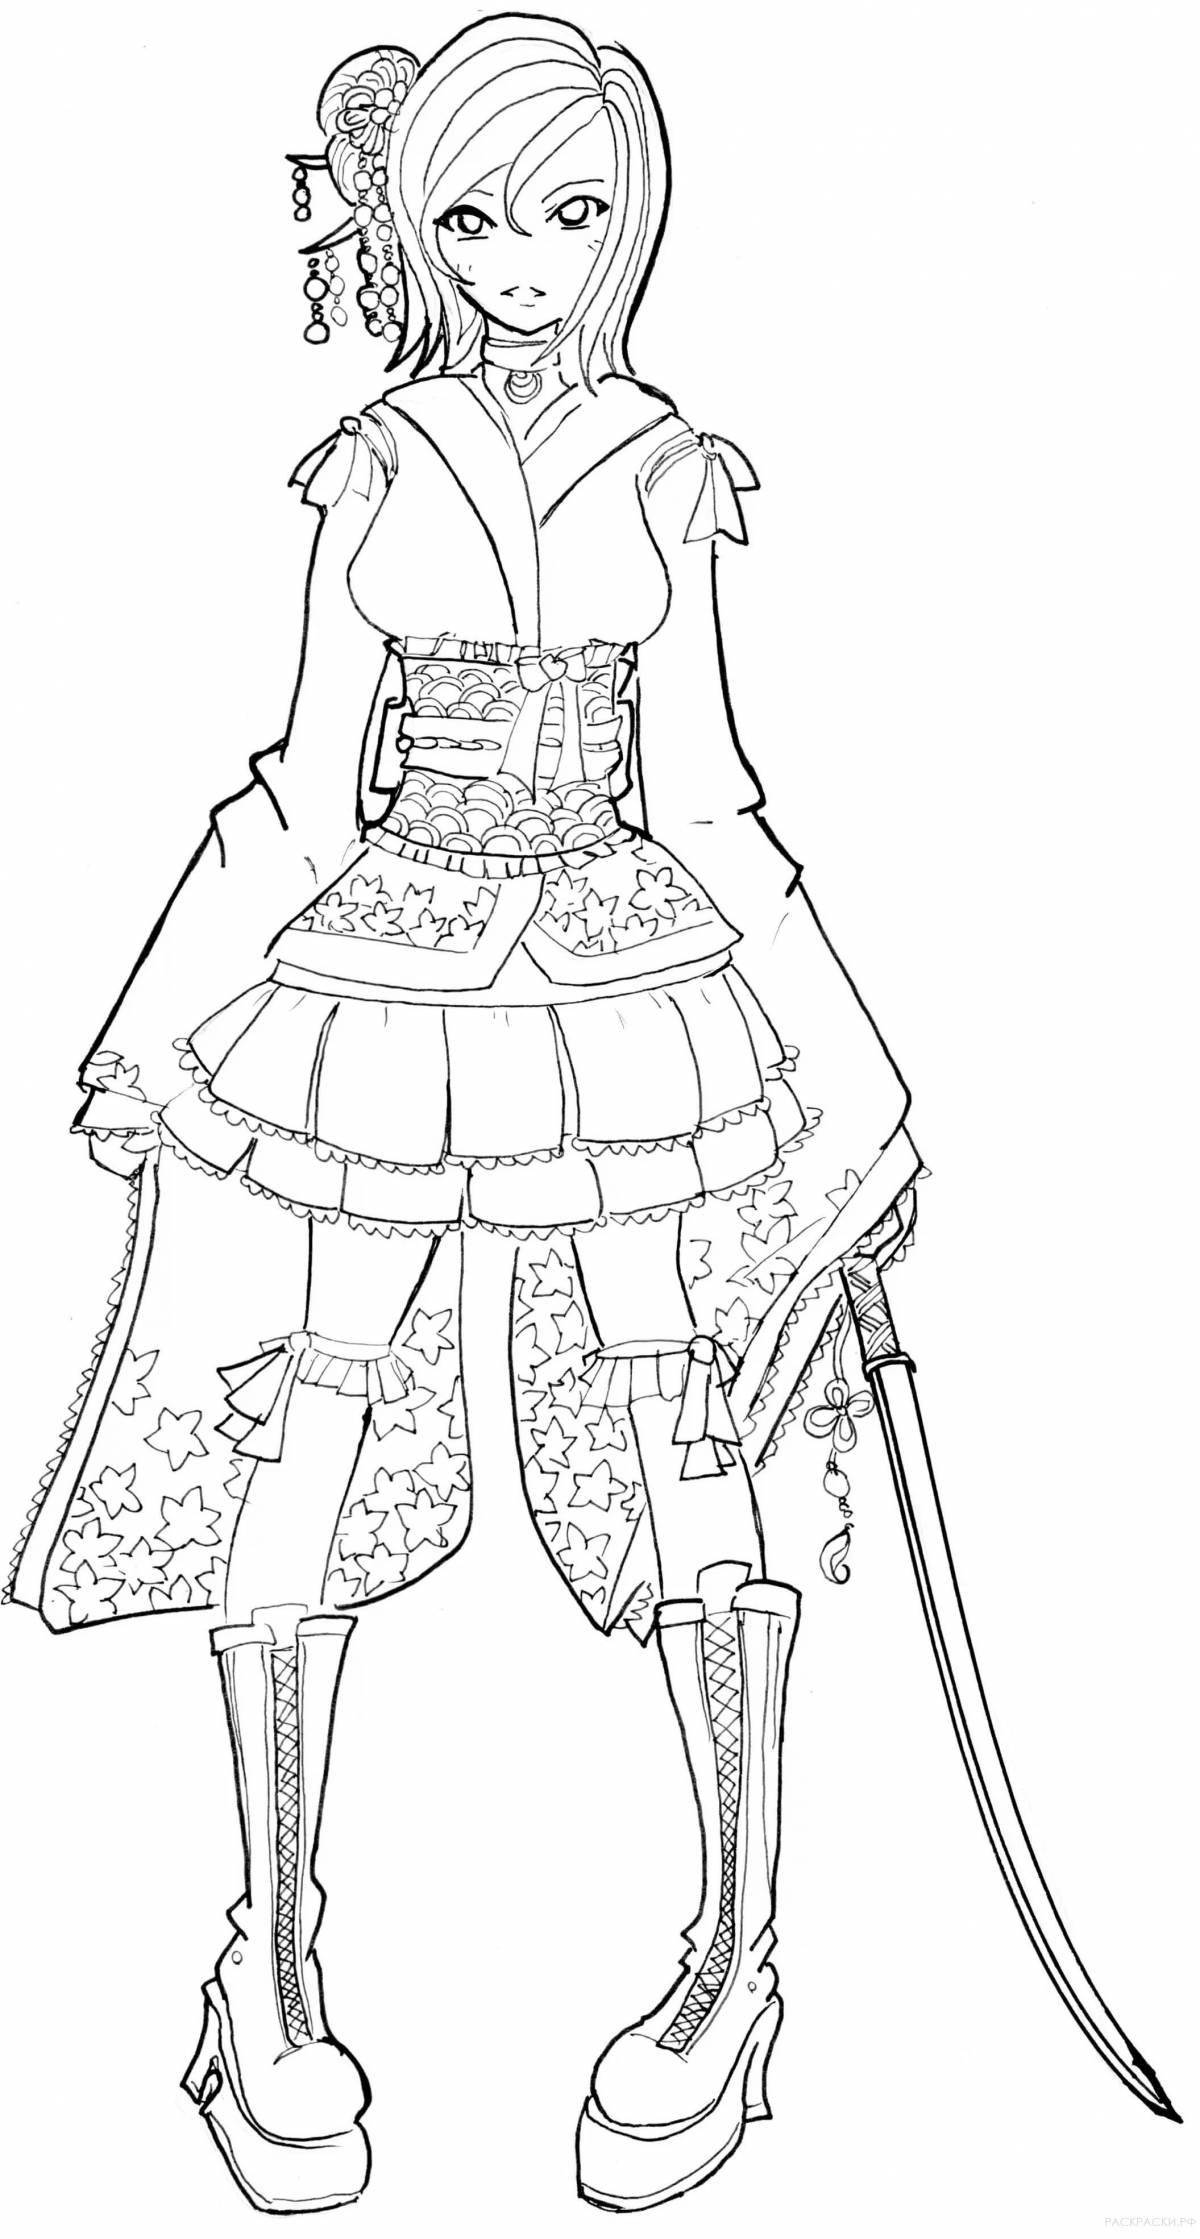 Uplifting coloring page anime full body girls